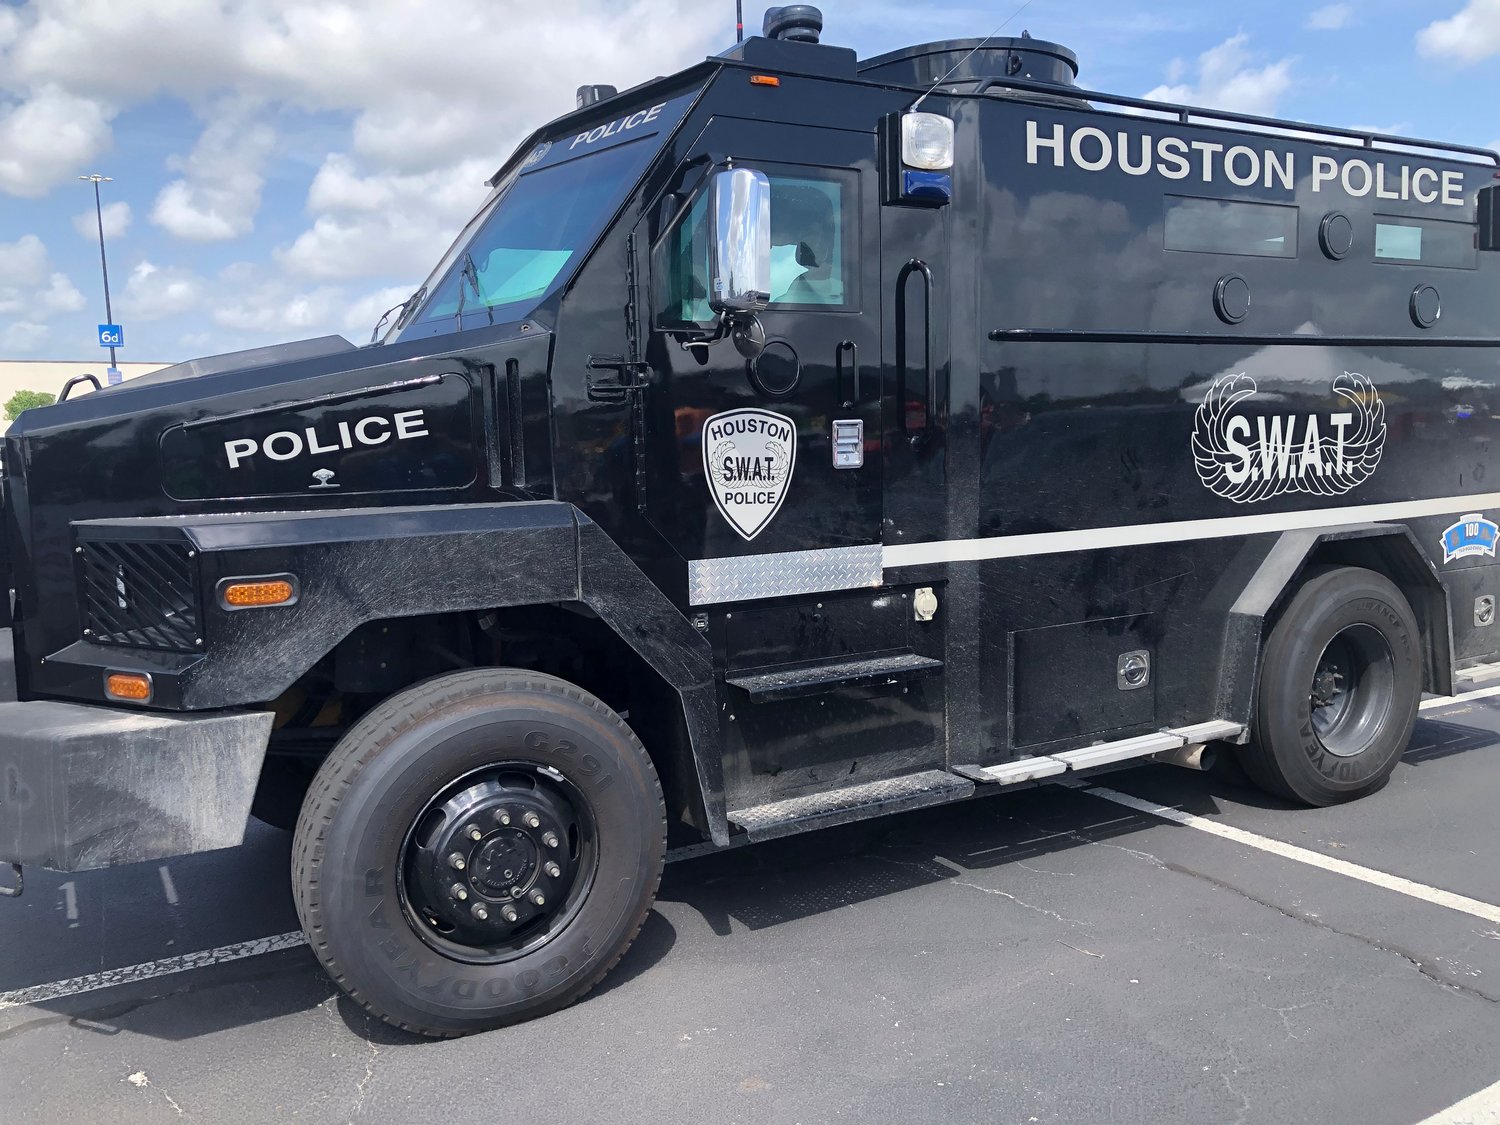 The Houston Police Department SWAT van was an attraction at the Safety Fest.